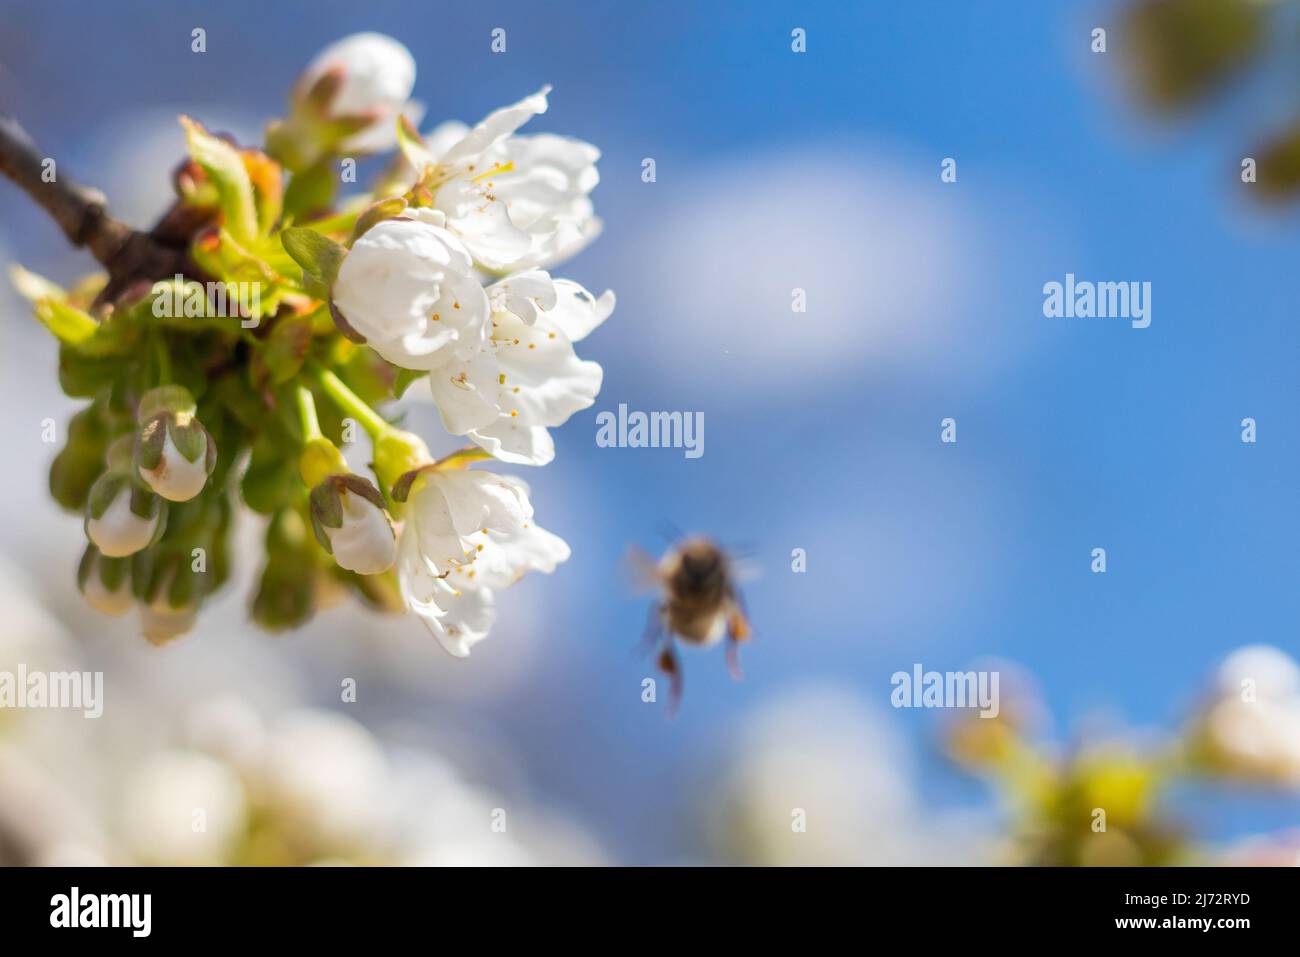 cherry blossoms in bloom on a branch with pollinating bee, sunny spring day with blue sky, close-up view Stock Photo